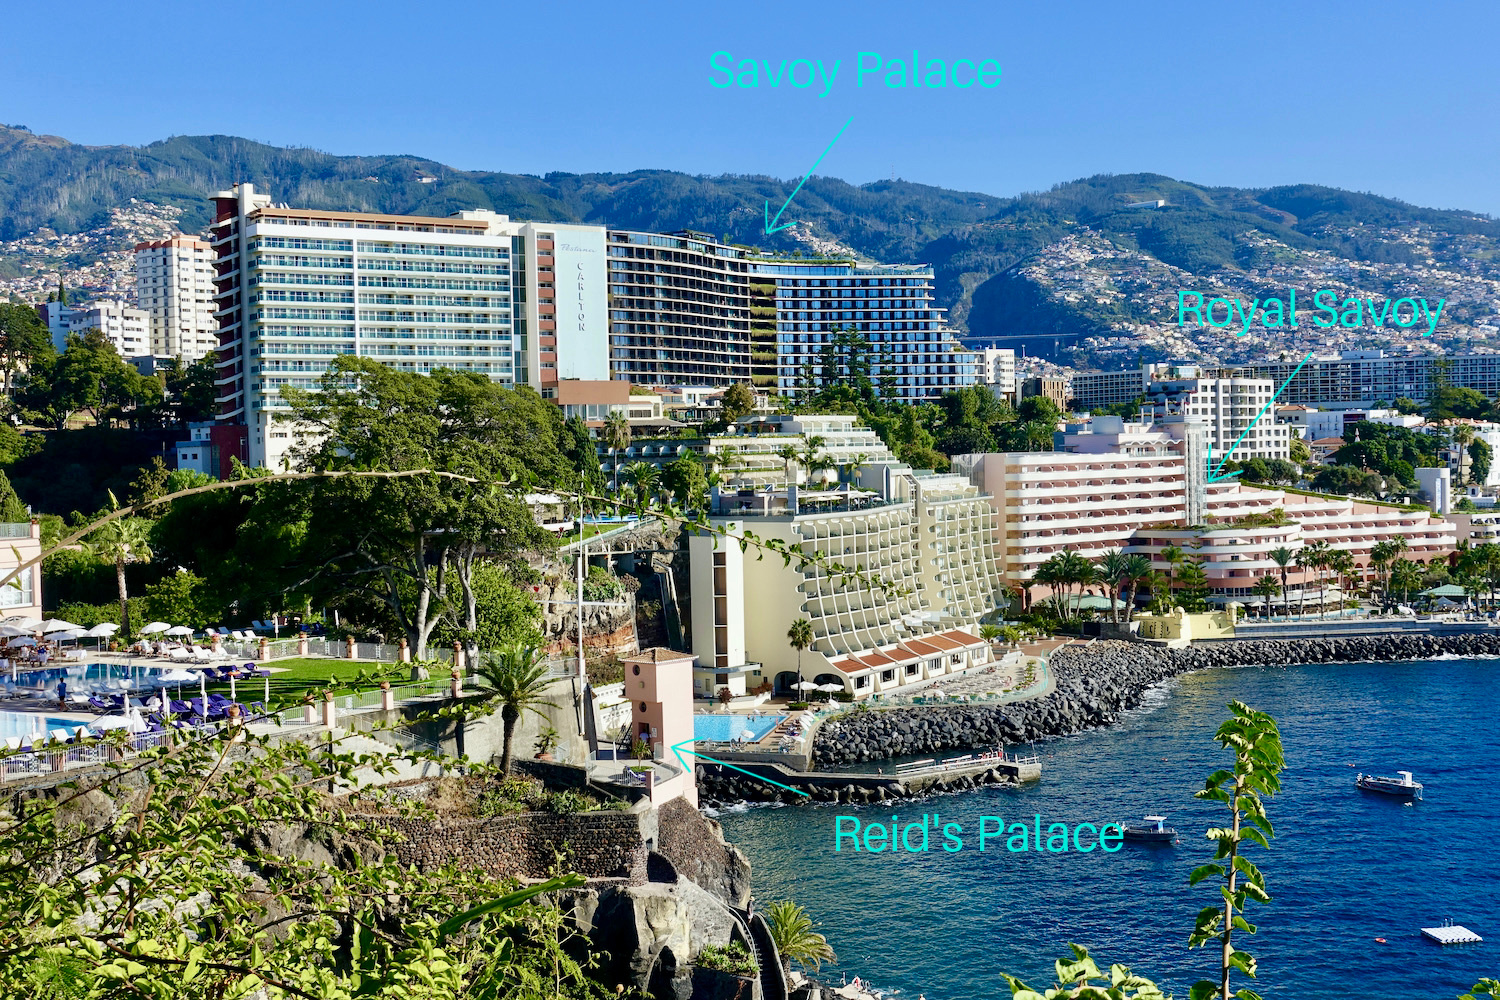 Savoy hotels Funchal - luxury hotels in Madeira